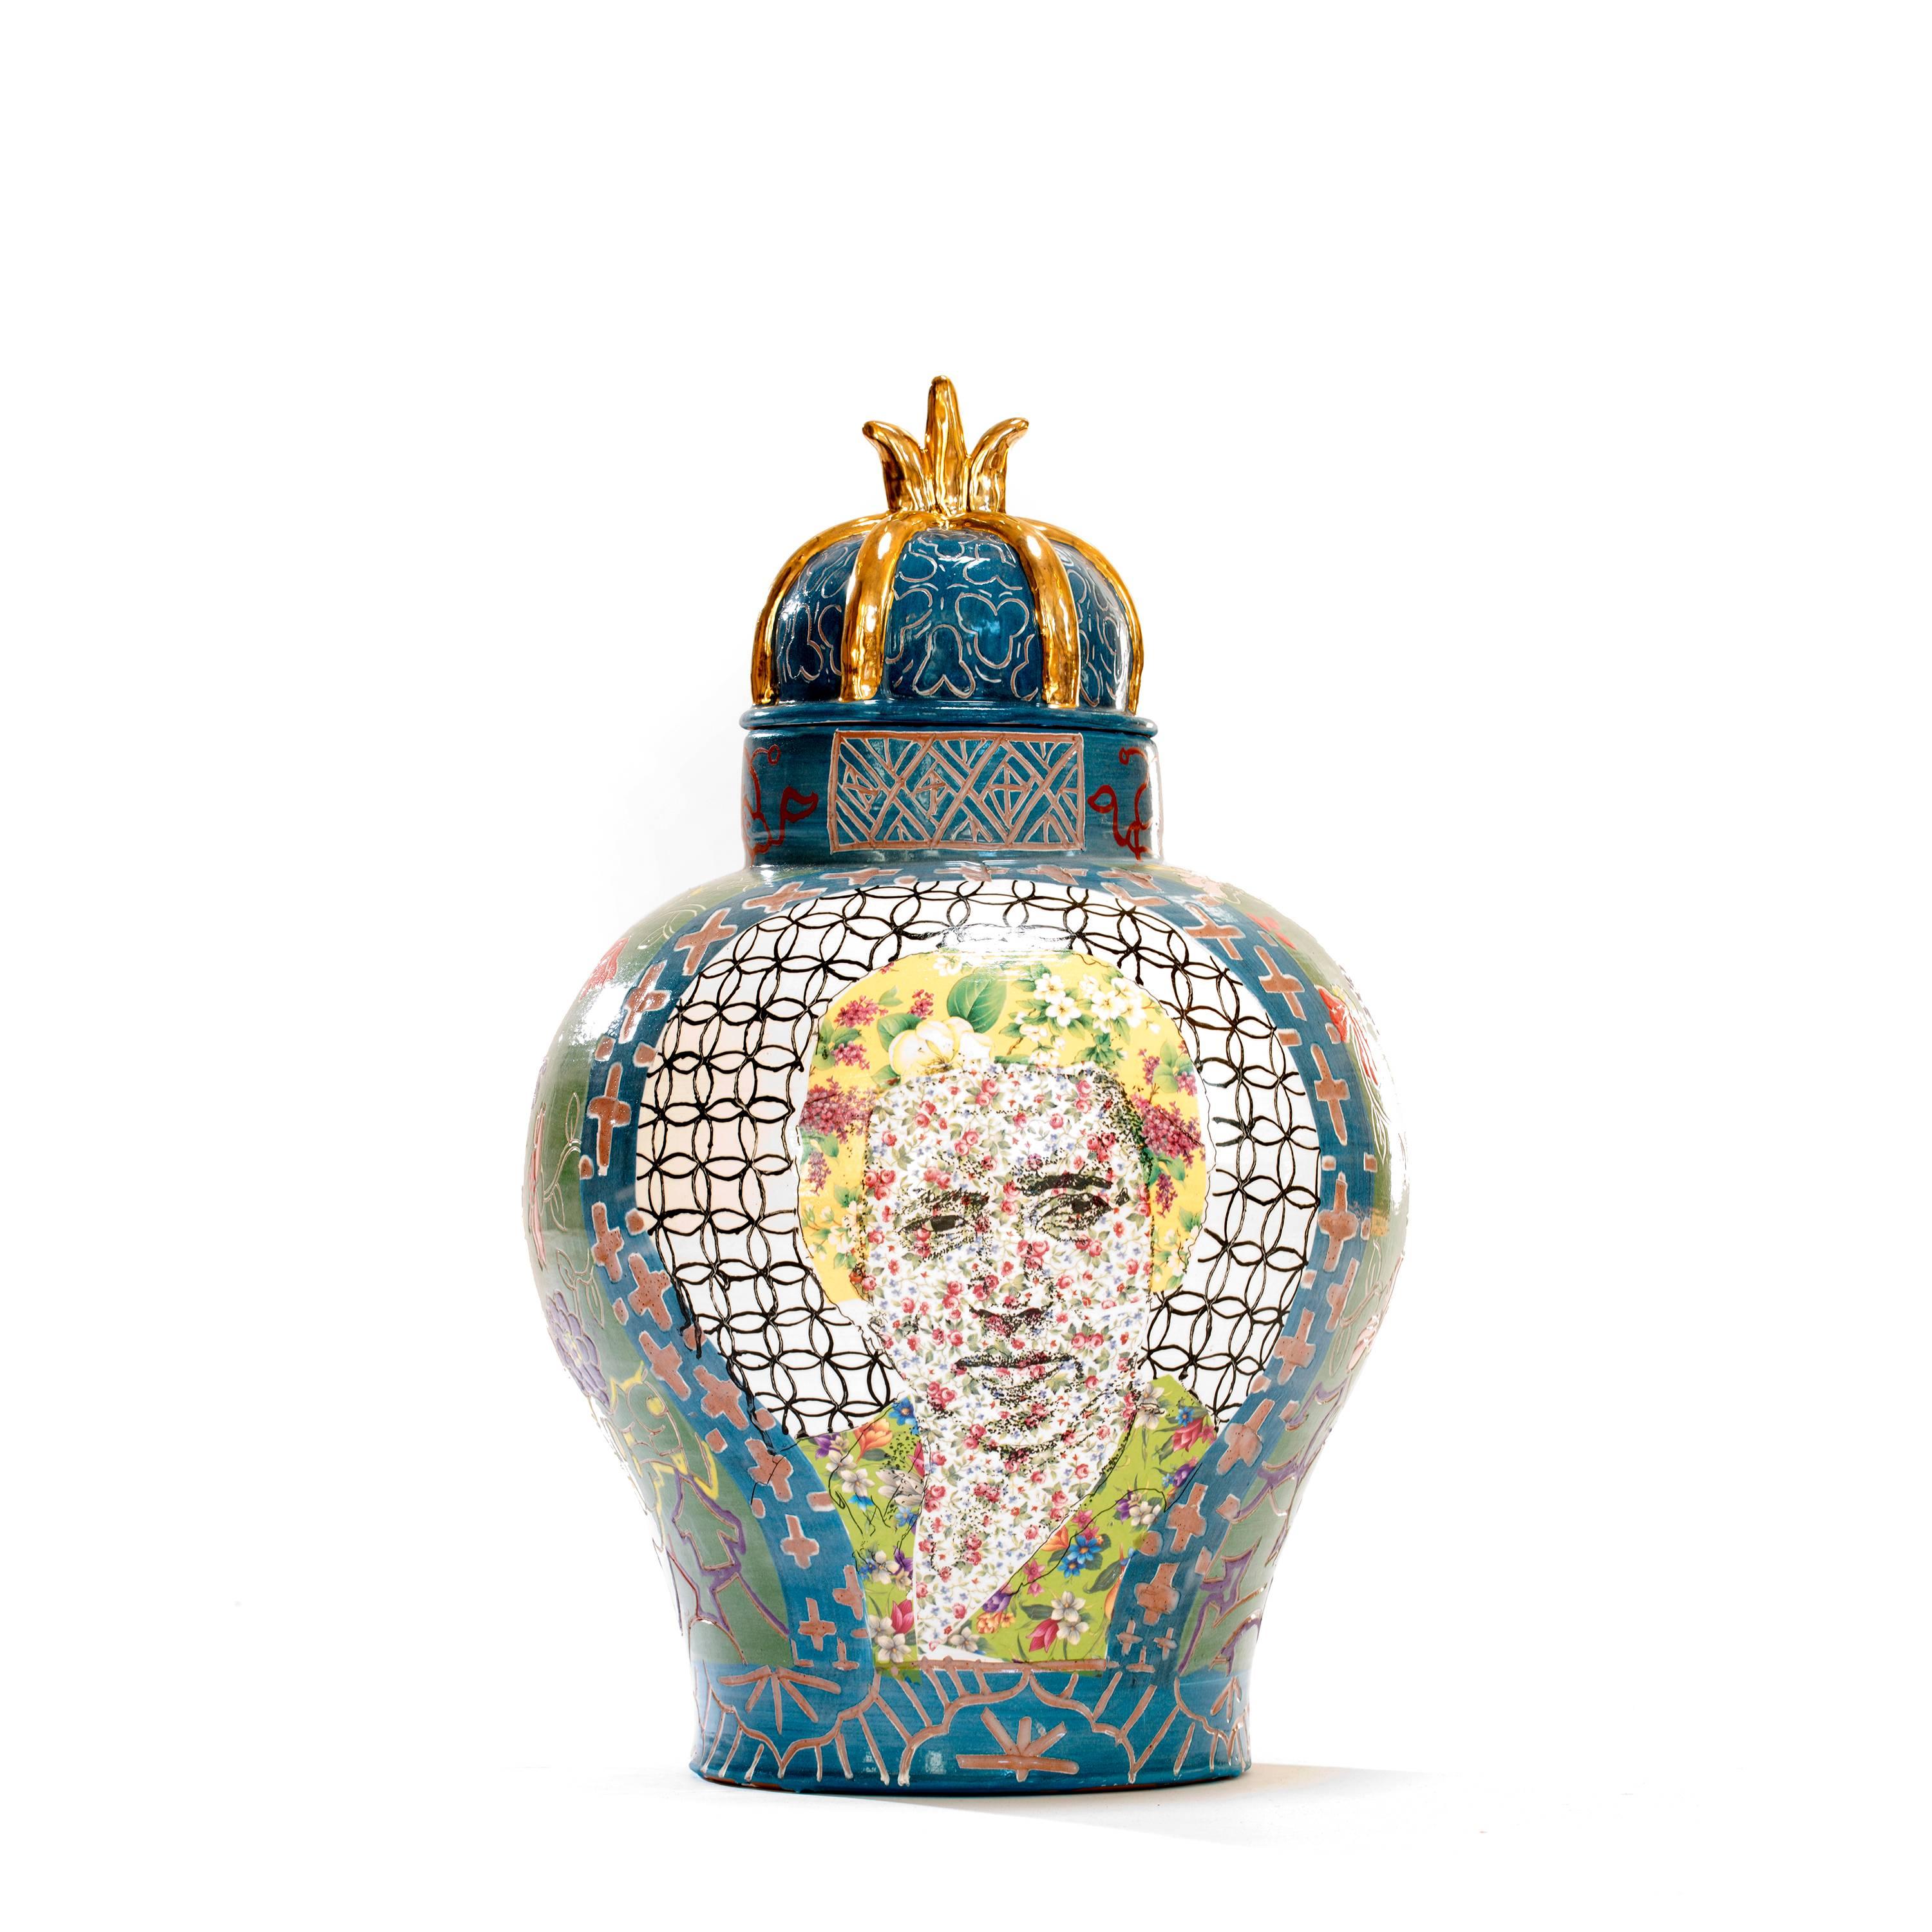 Frederick Douglass / Arthur Ashe urn is made by Roberto Lugo out of porcelain, china paint and gold luster.

Best known for expertly thrown ceramic vessels that are illustrated with activists, political figures, and hip-hop legends, Lugo aims to